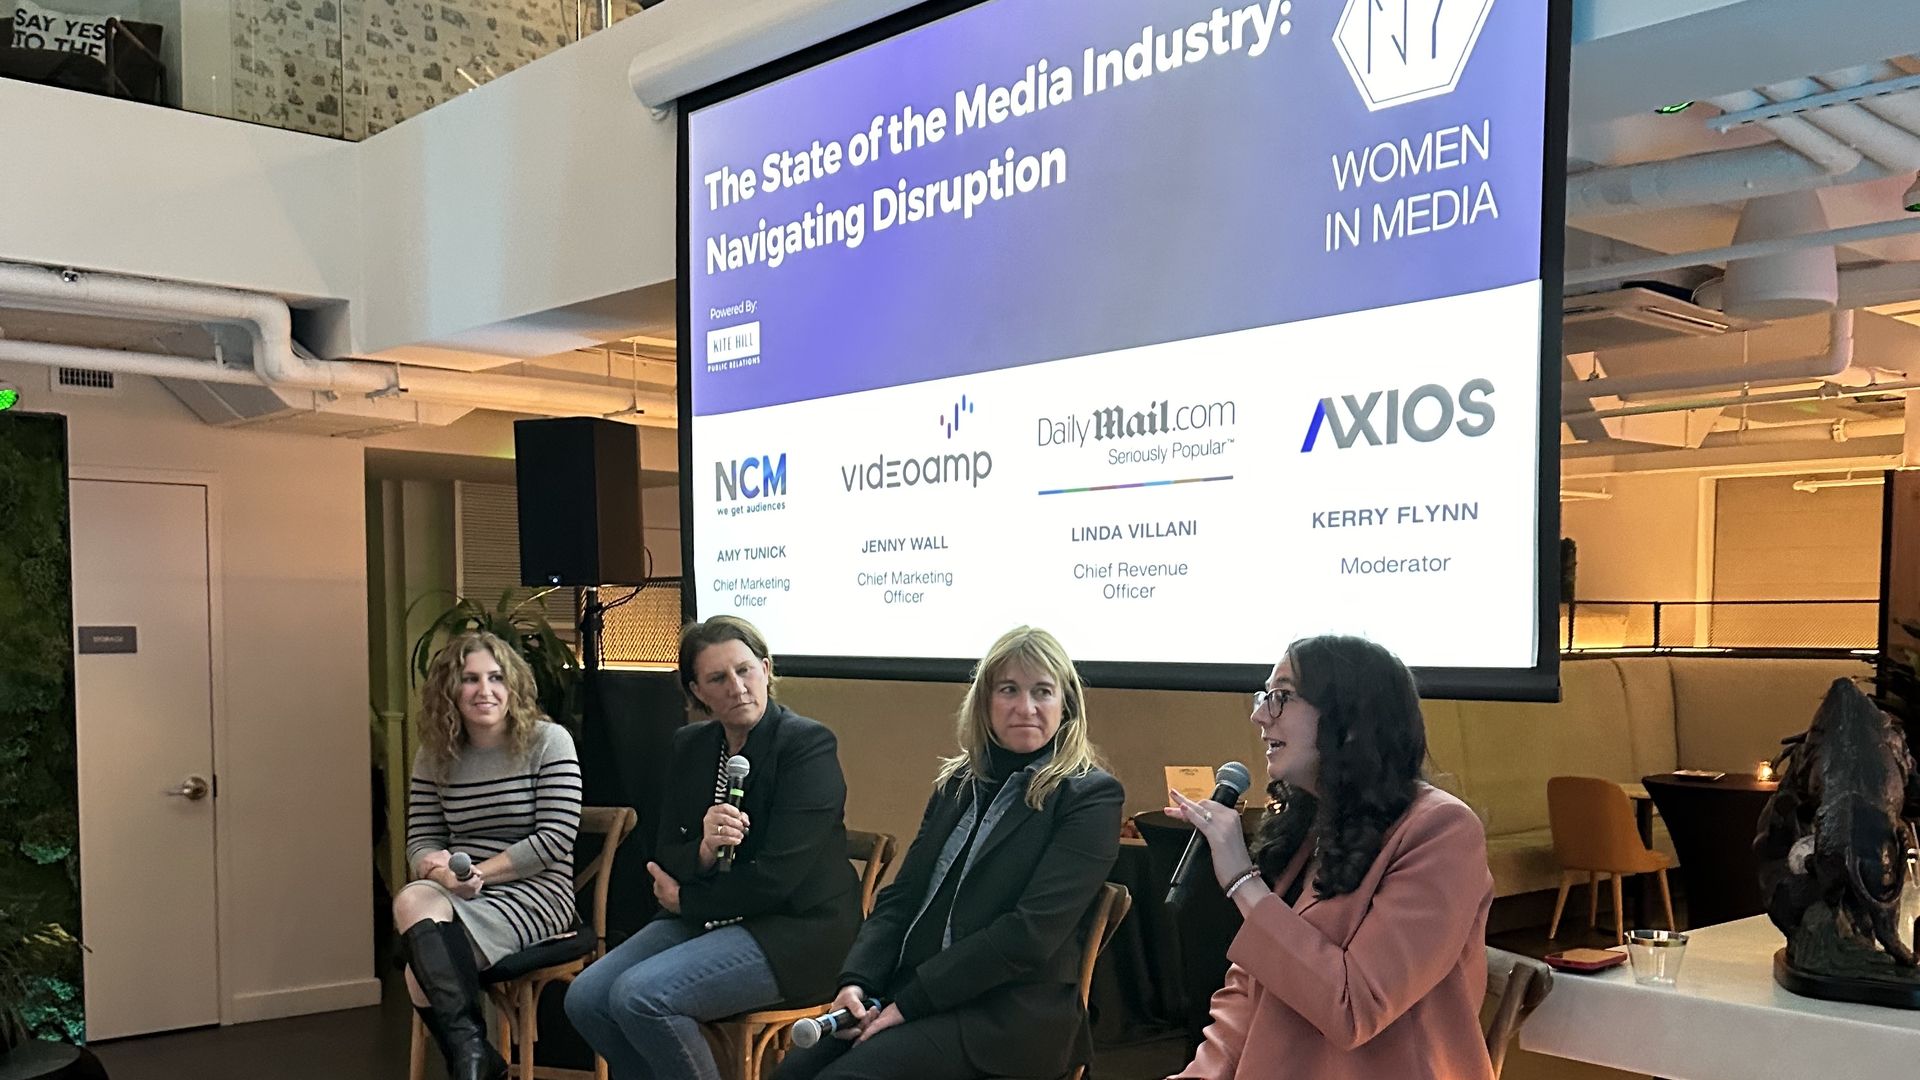 Four women sitting in chairs in front of a screen that reads "The State of the Media Industry: Navigating Disruption"